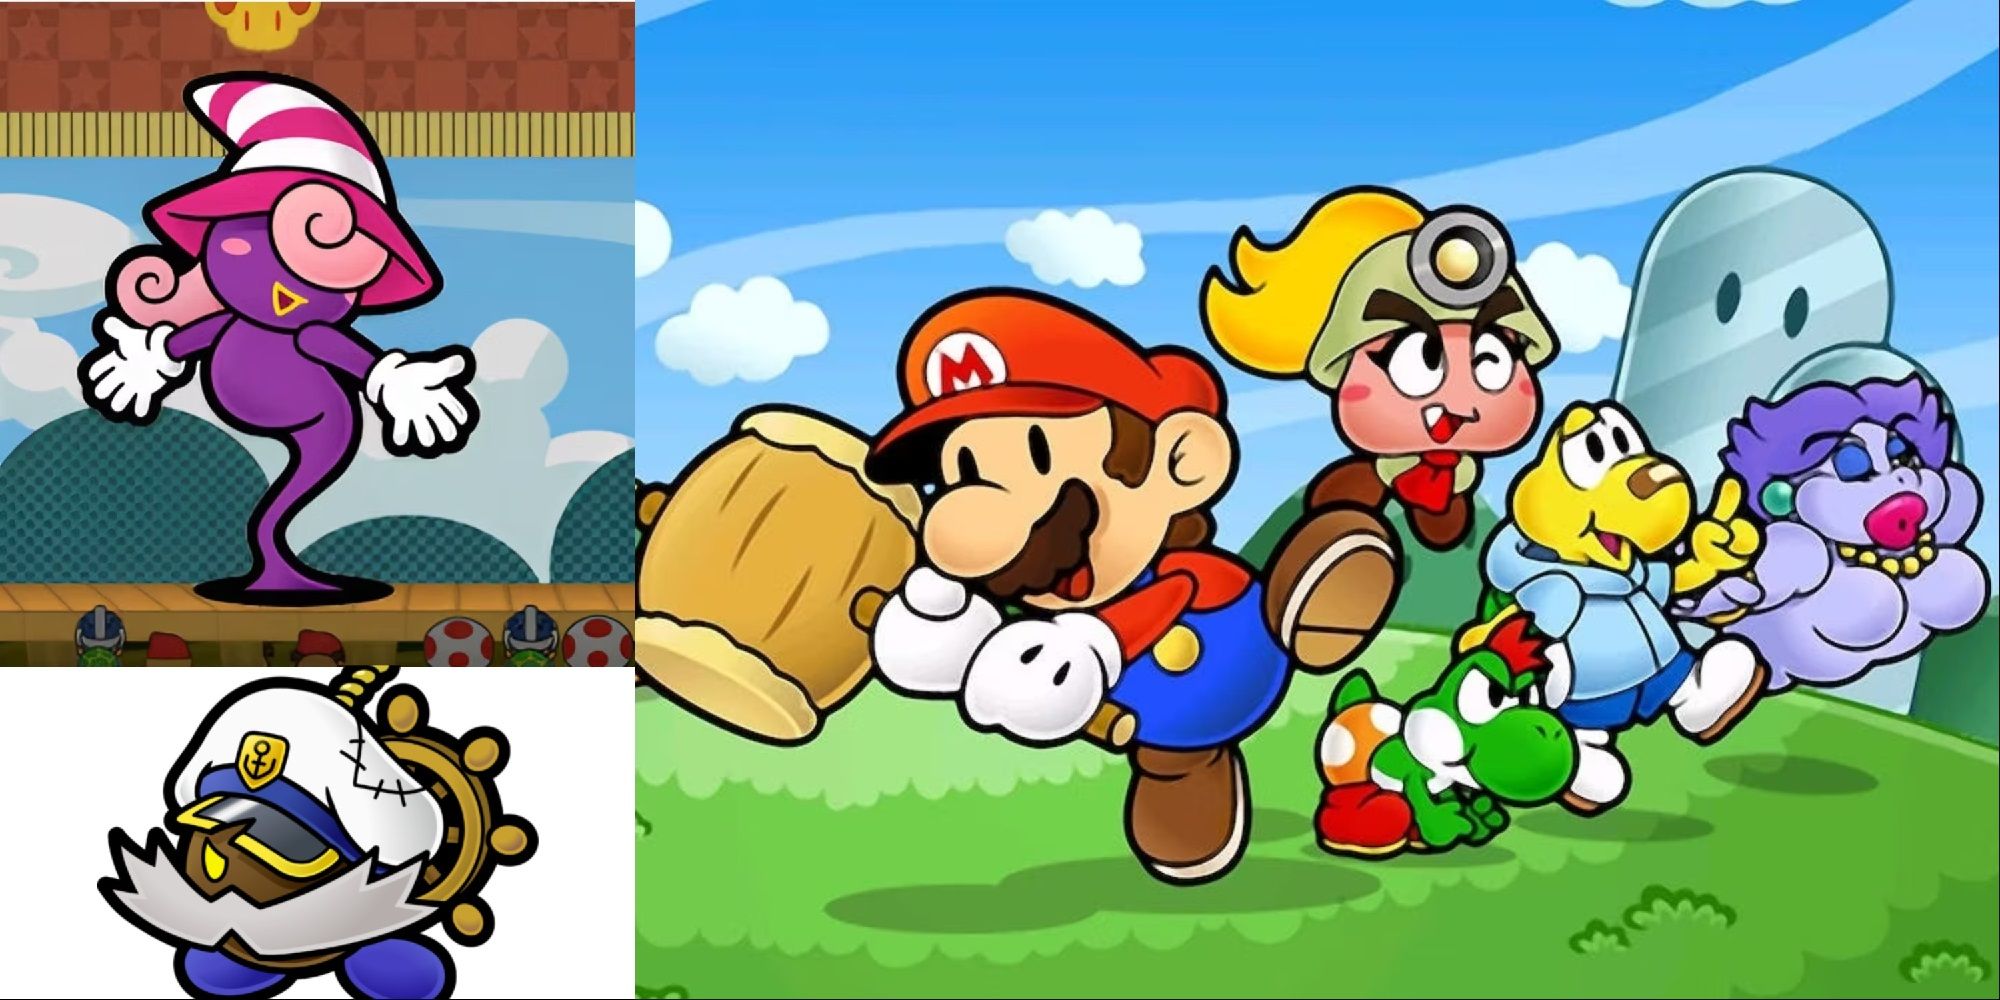 Paper Mario poses with various party members from the game.